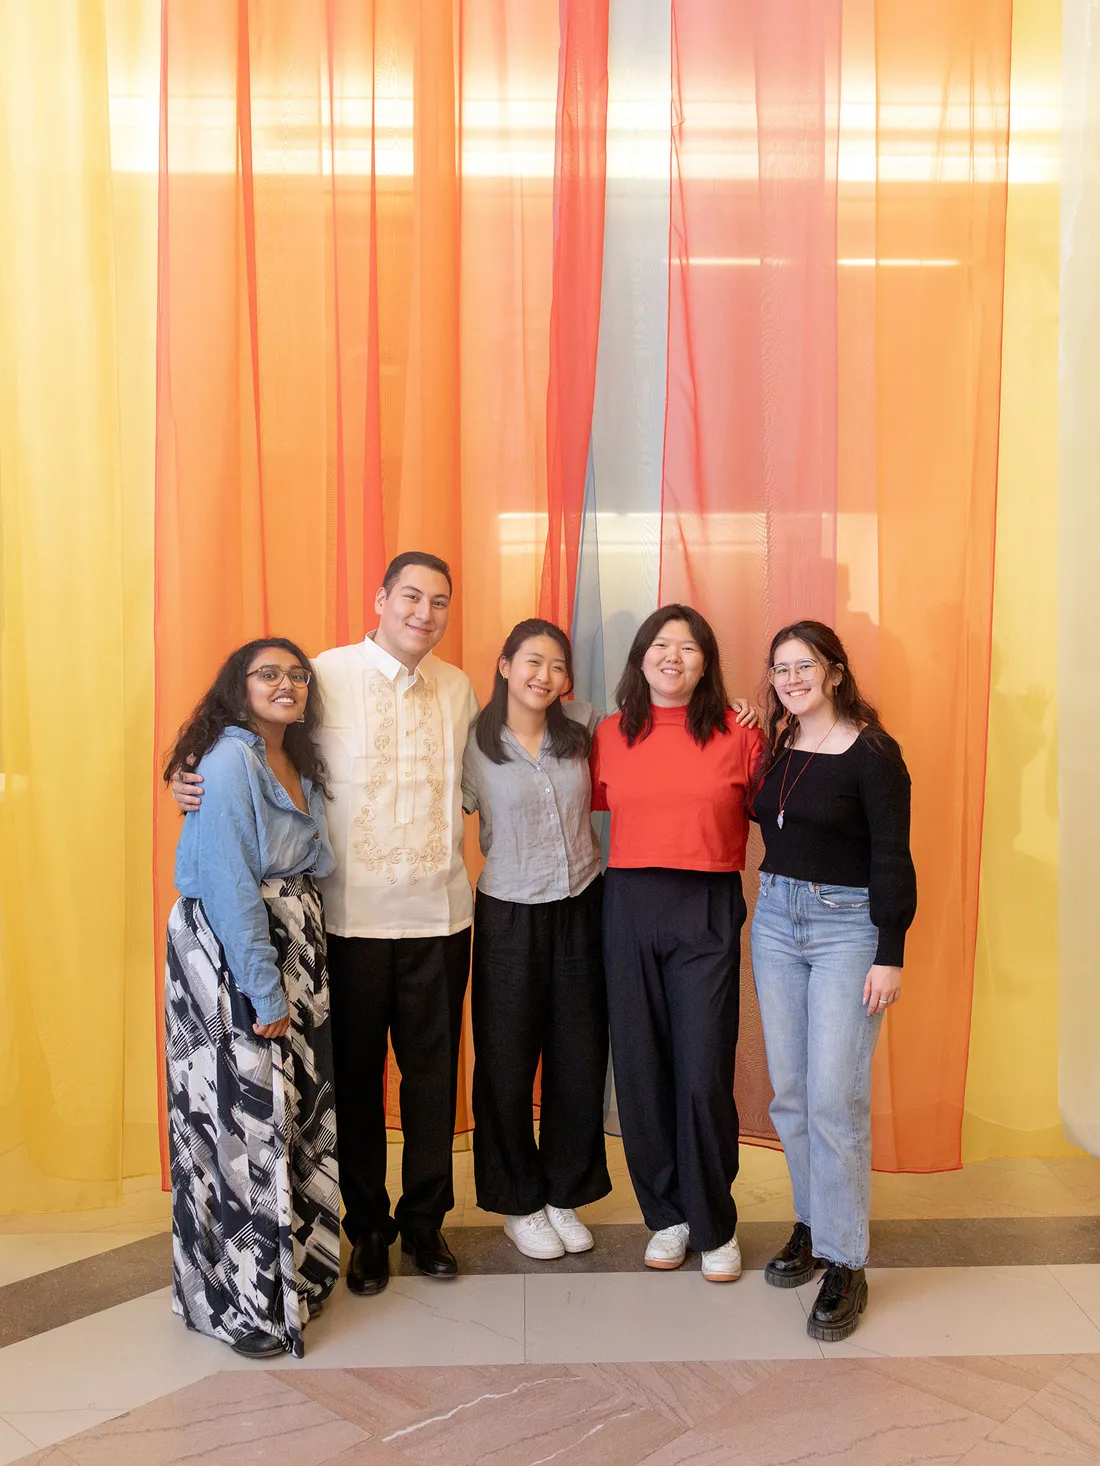 AAIP event organizers Nikita Goswami, Aiden McGorry, Lauren Li, Lillian Zhao and Maya Angela Simms stand inside Identity Unboxed, an art installation created by McGorry, Zhao and Li.